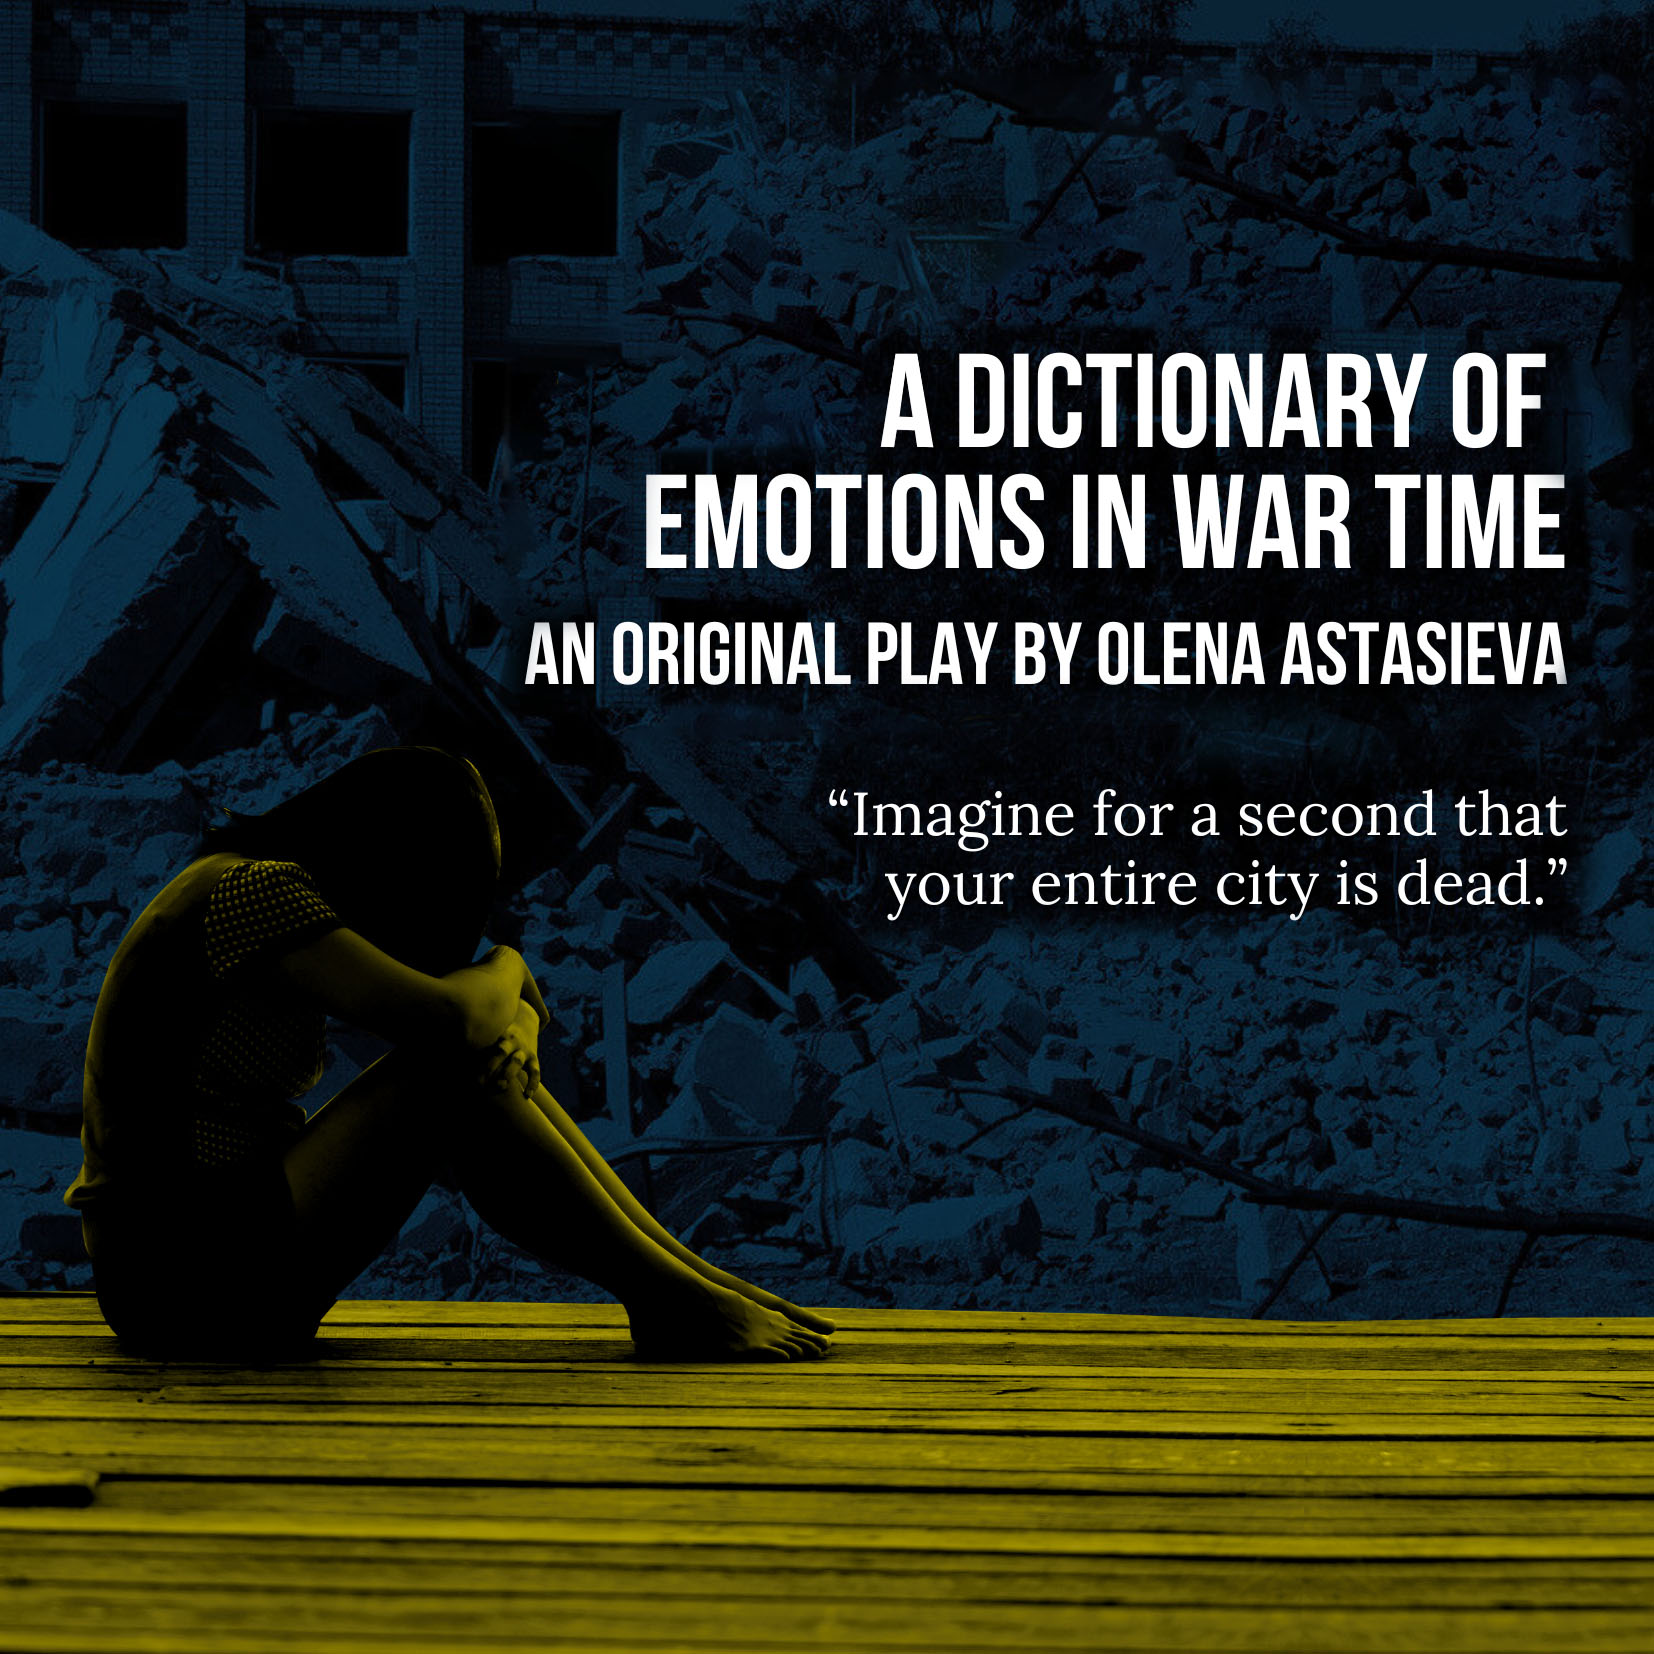 A Dictionary of Emotions in War Time at Langham Court Theatre